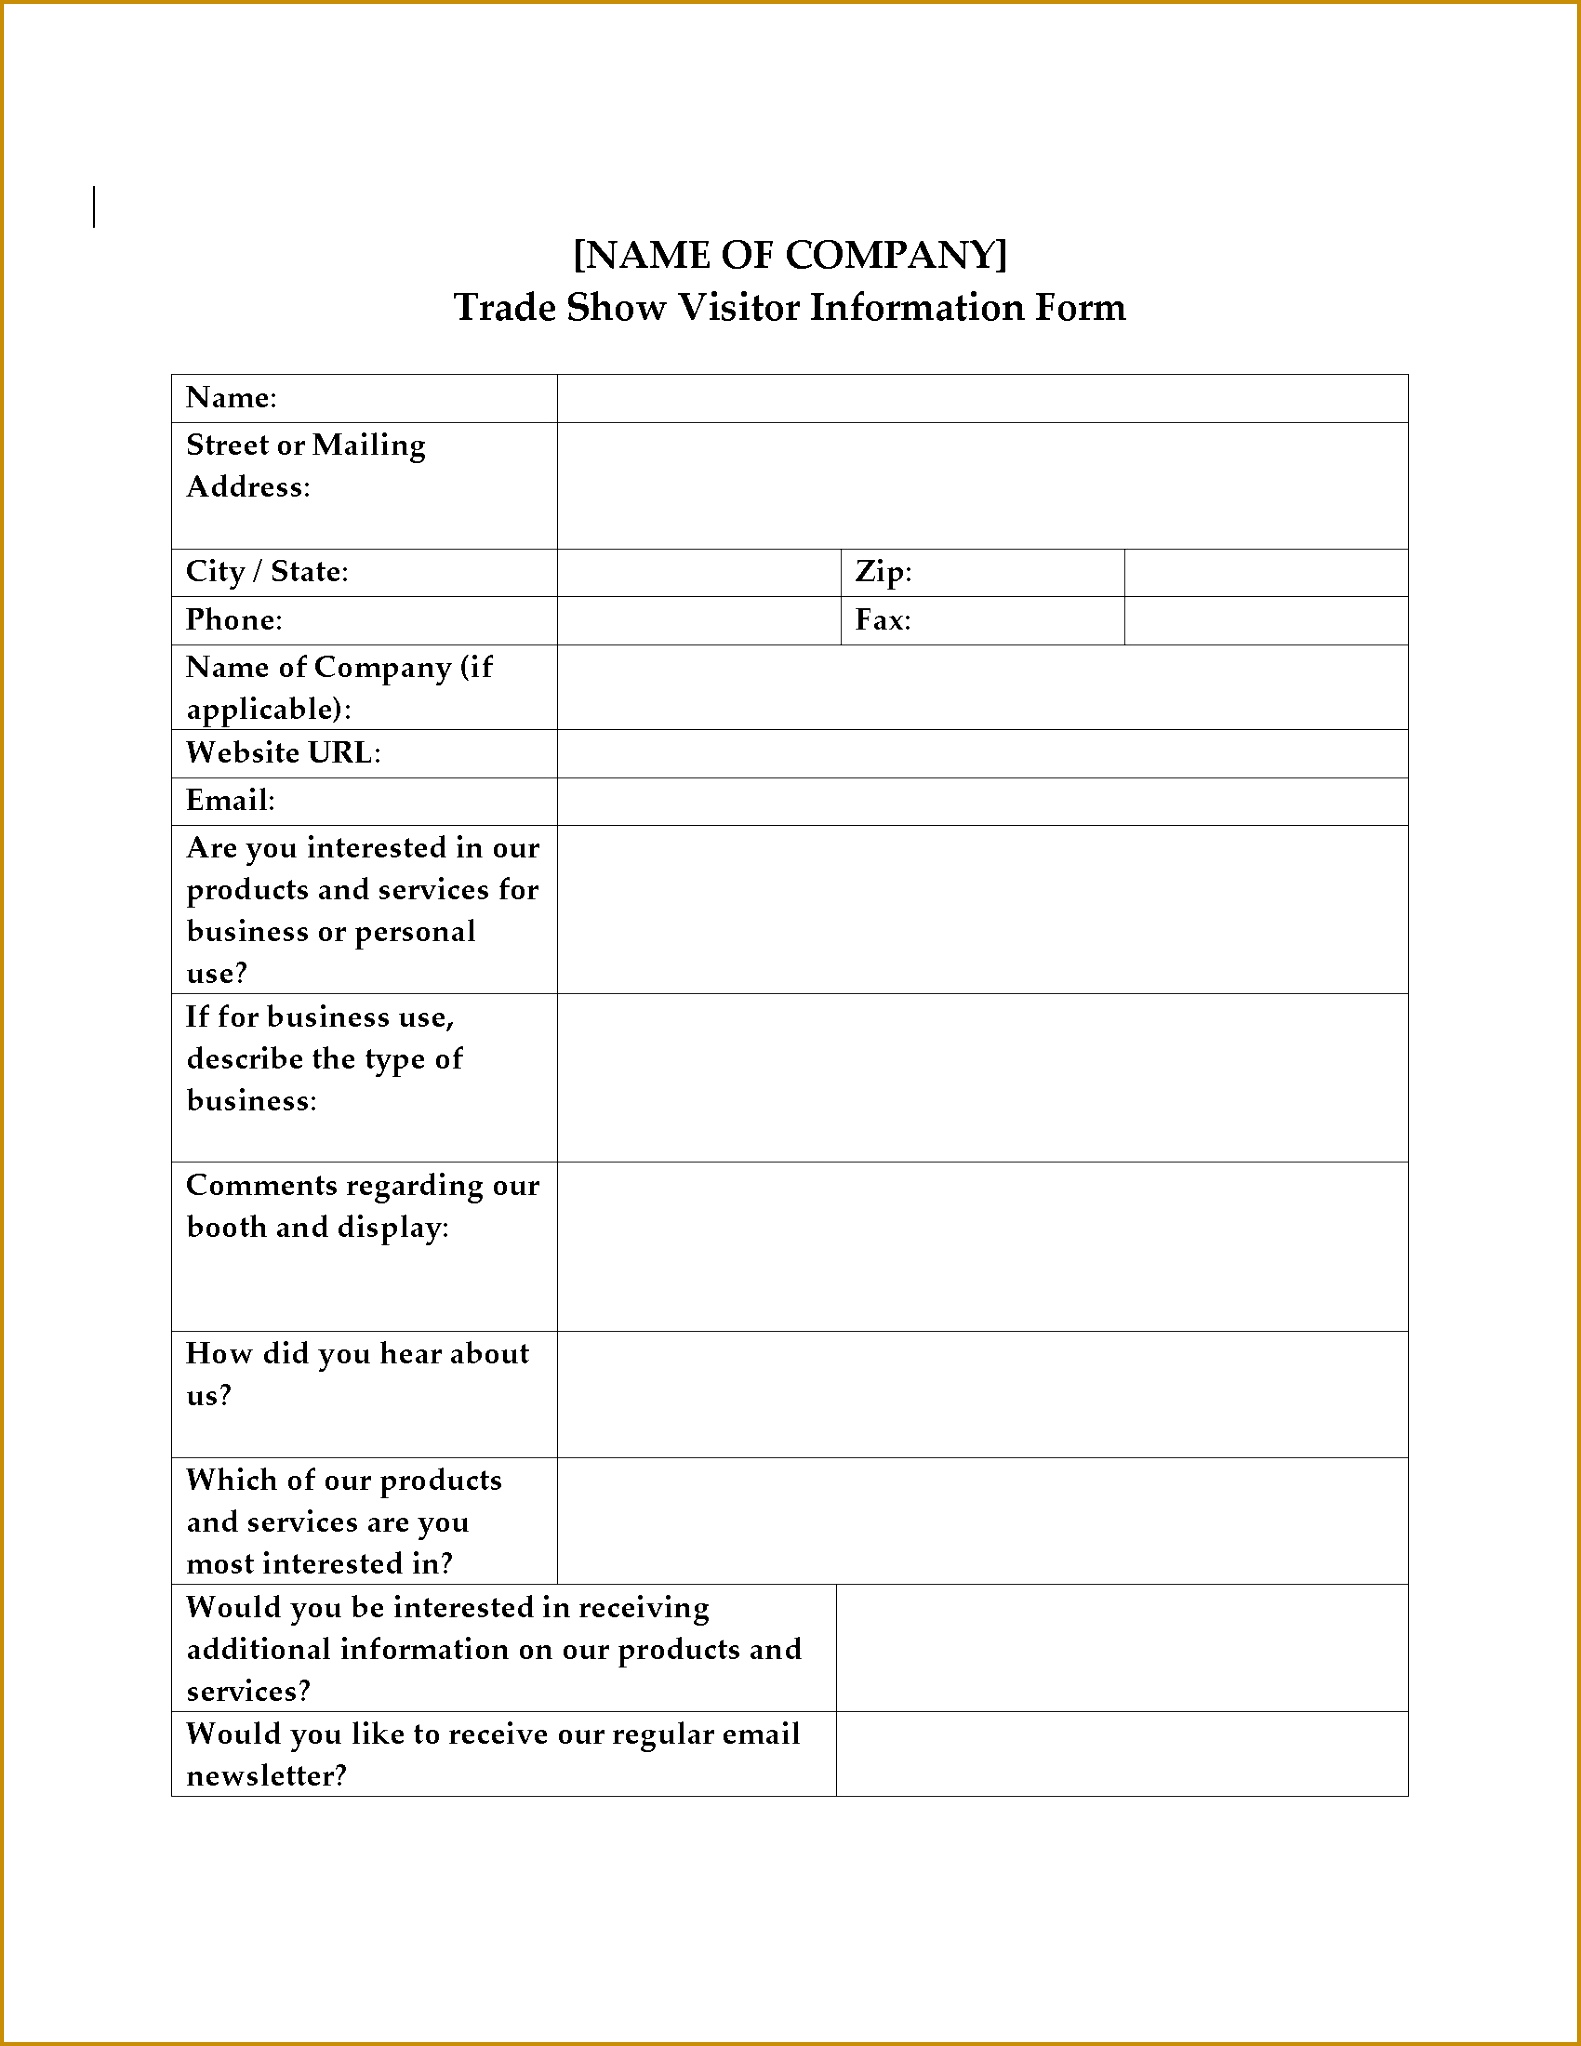 Picture of Trade Show Visitor Information Form 20461581